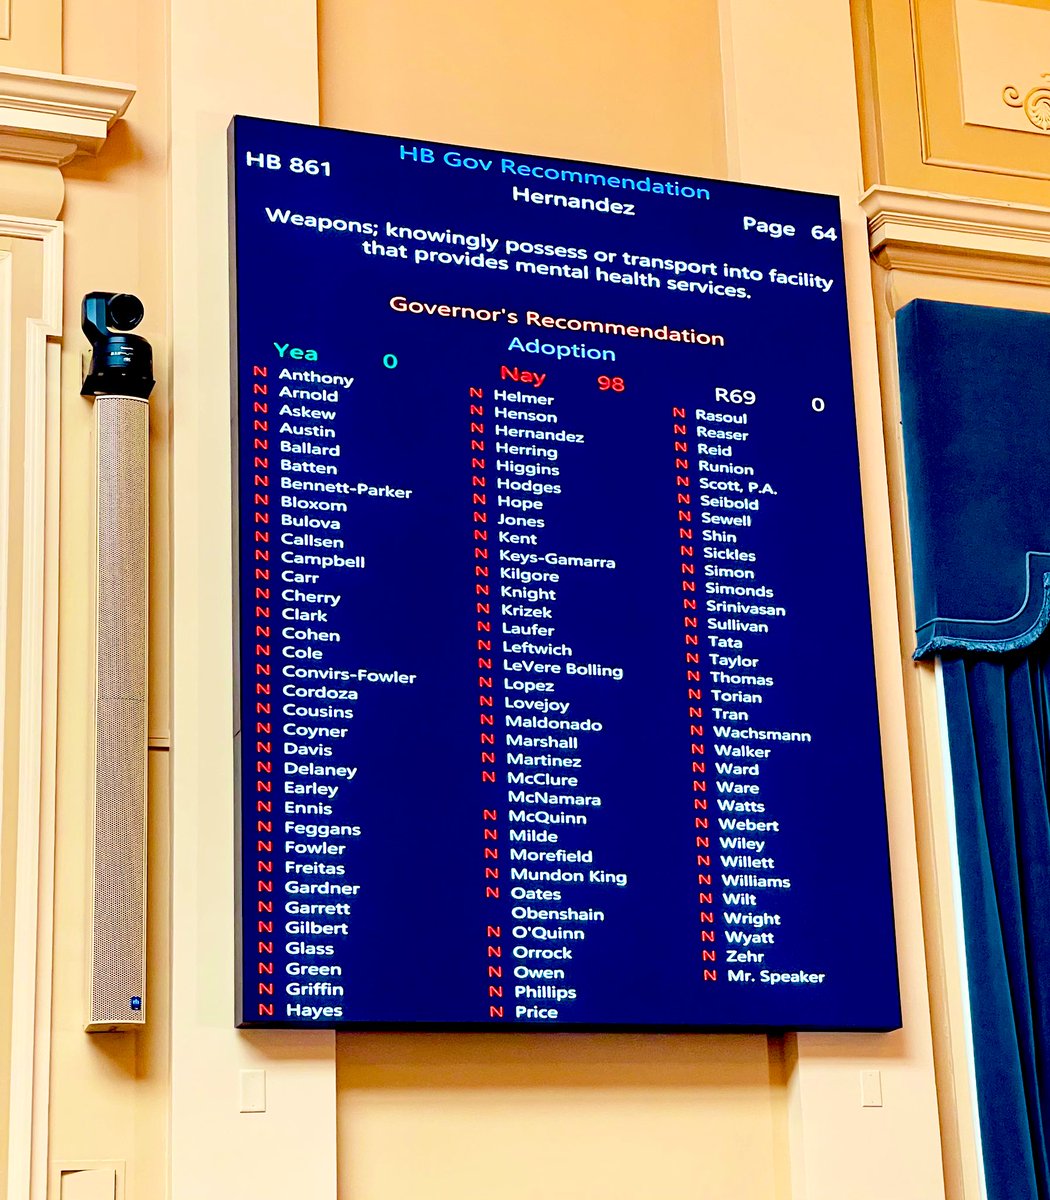 Loved seeing the House uniformly reject the Gov’s amendments to my HB 861, which prohibits dangerous weapons in hospitals. The amendments would have gutted the bill & failed to keep frontline healthcare workers safe.